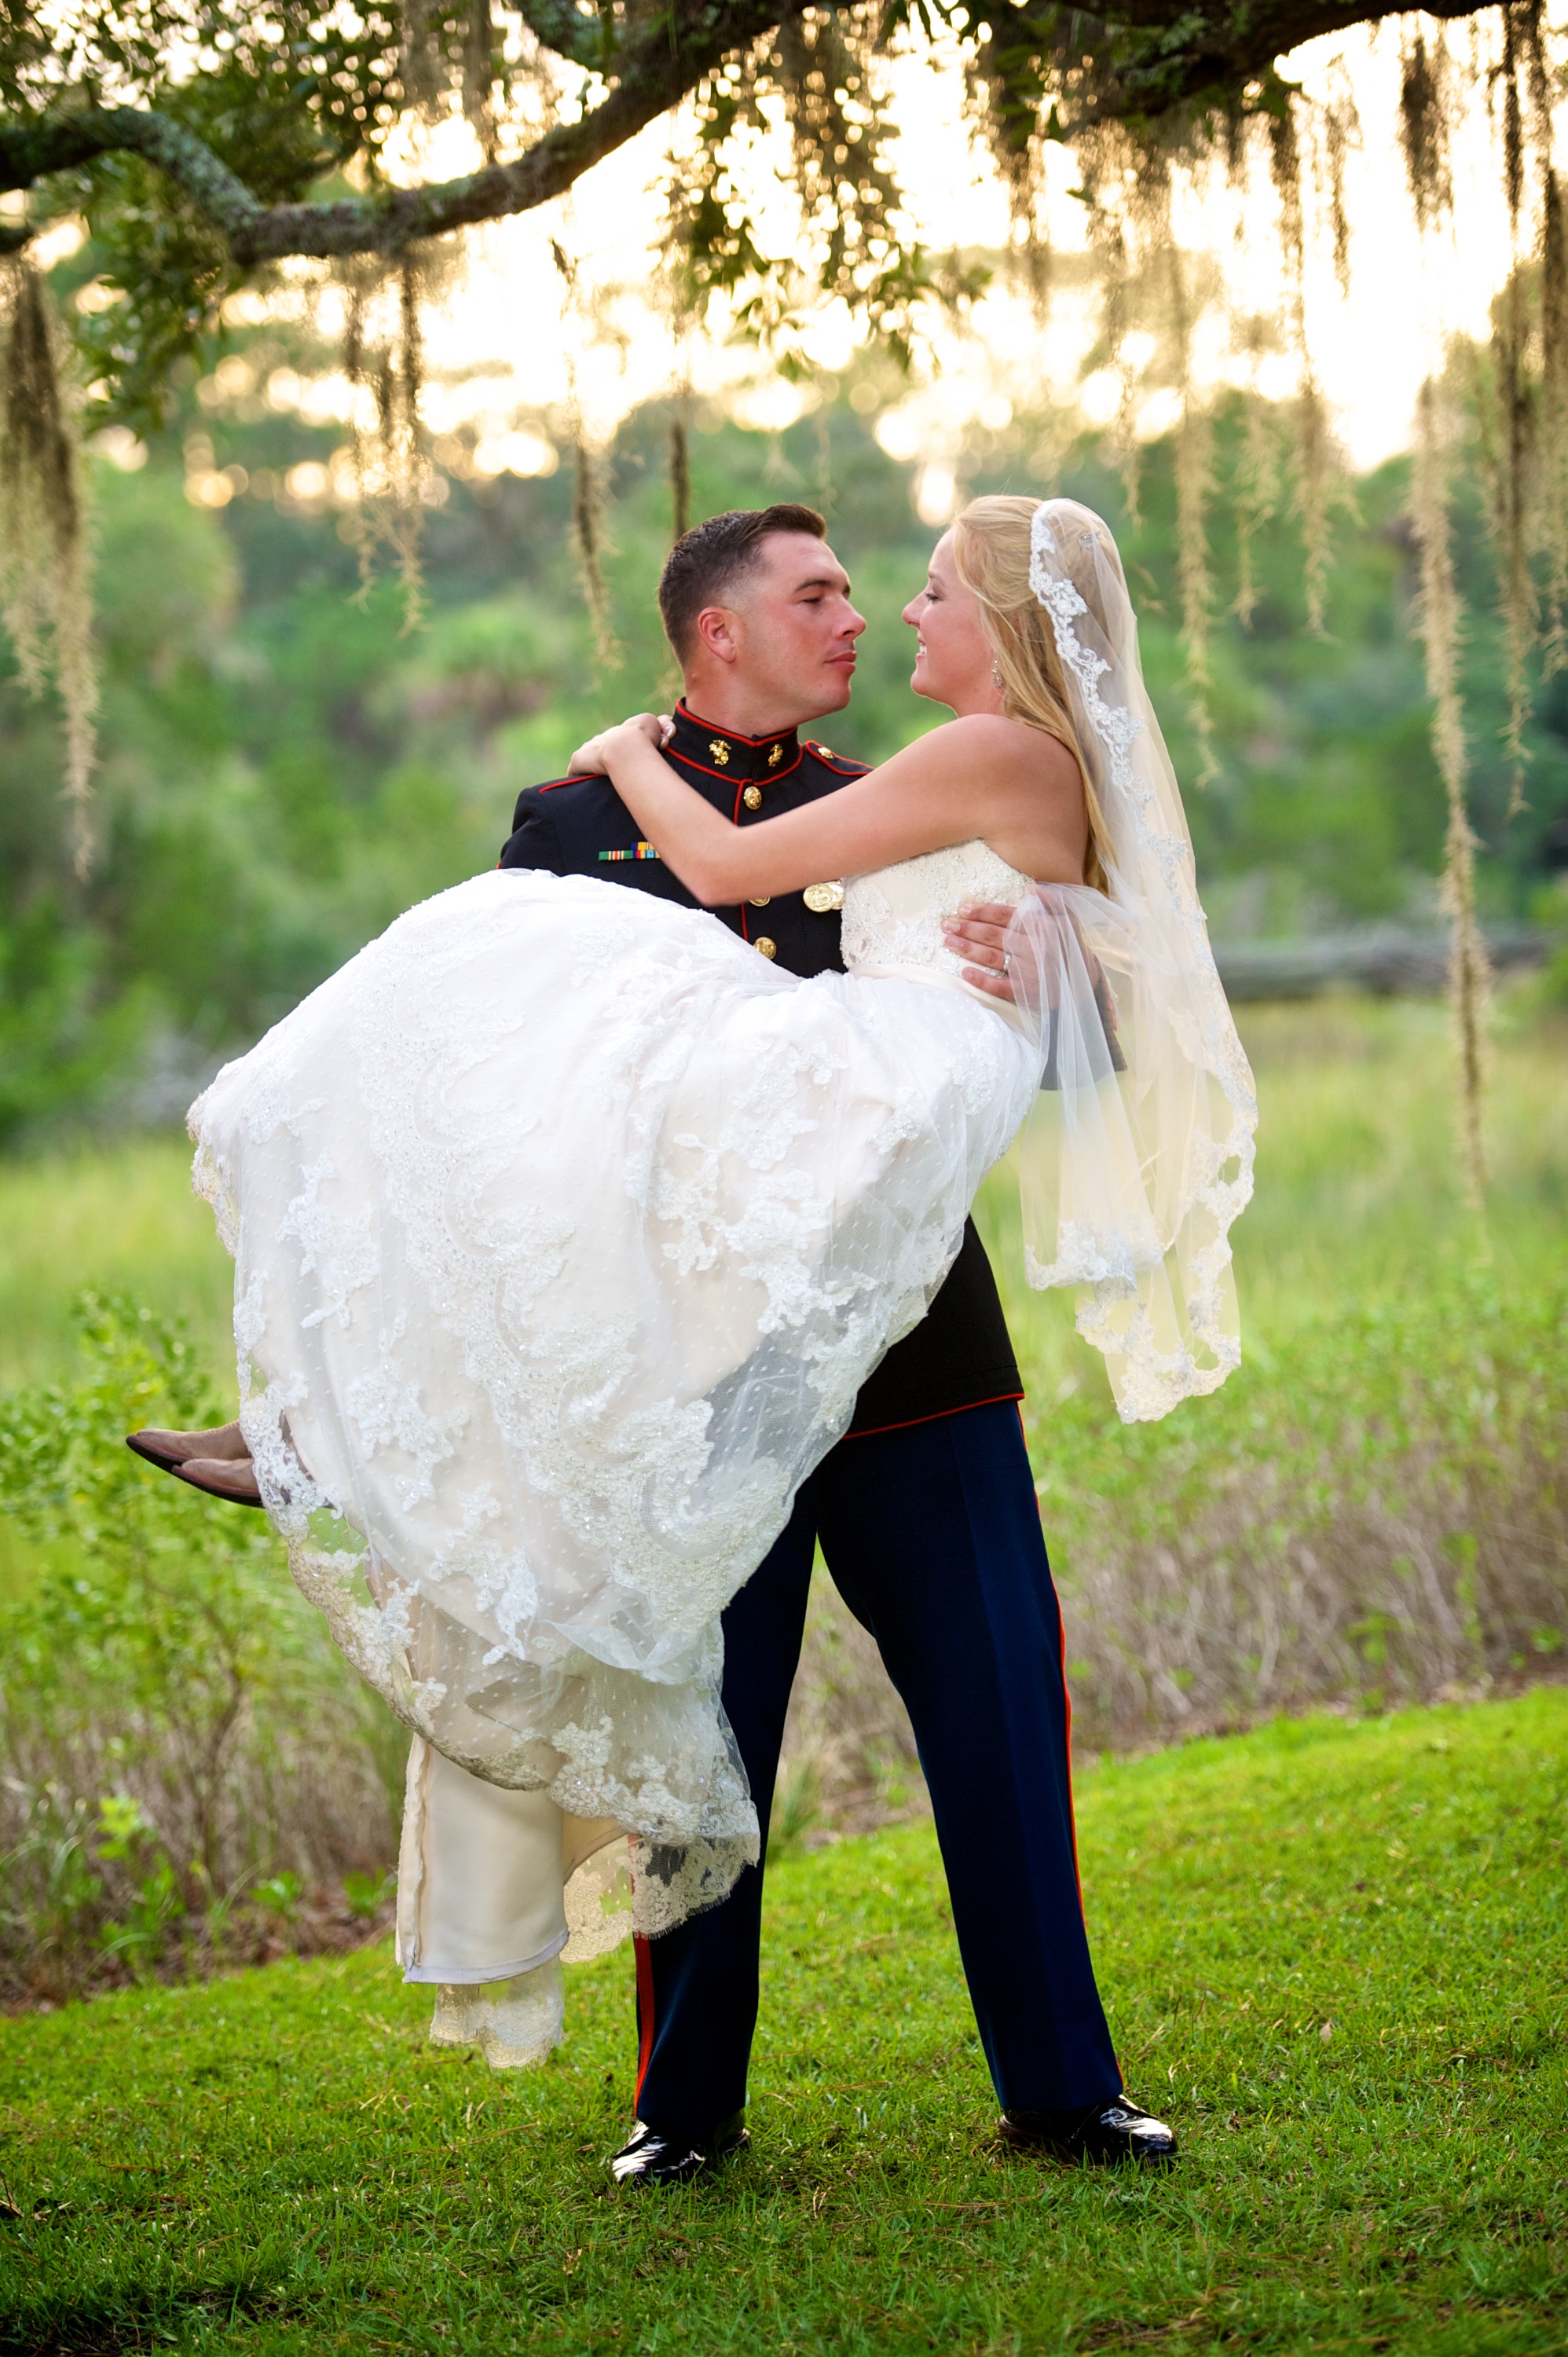  Lauren and Alex's Wedding in Bluffton, SC on the May River 